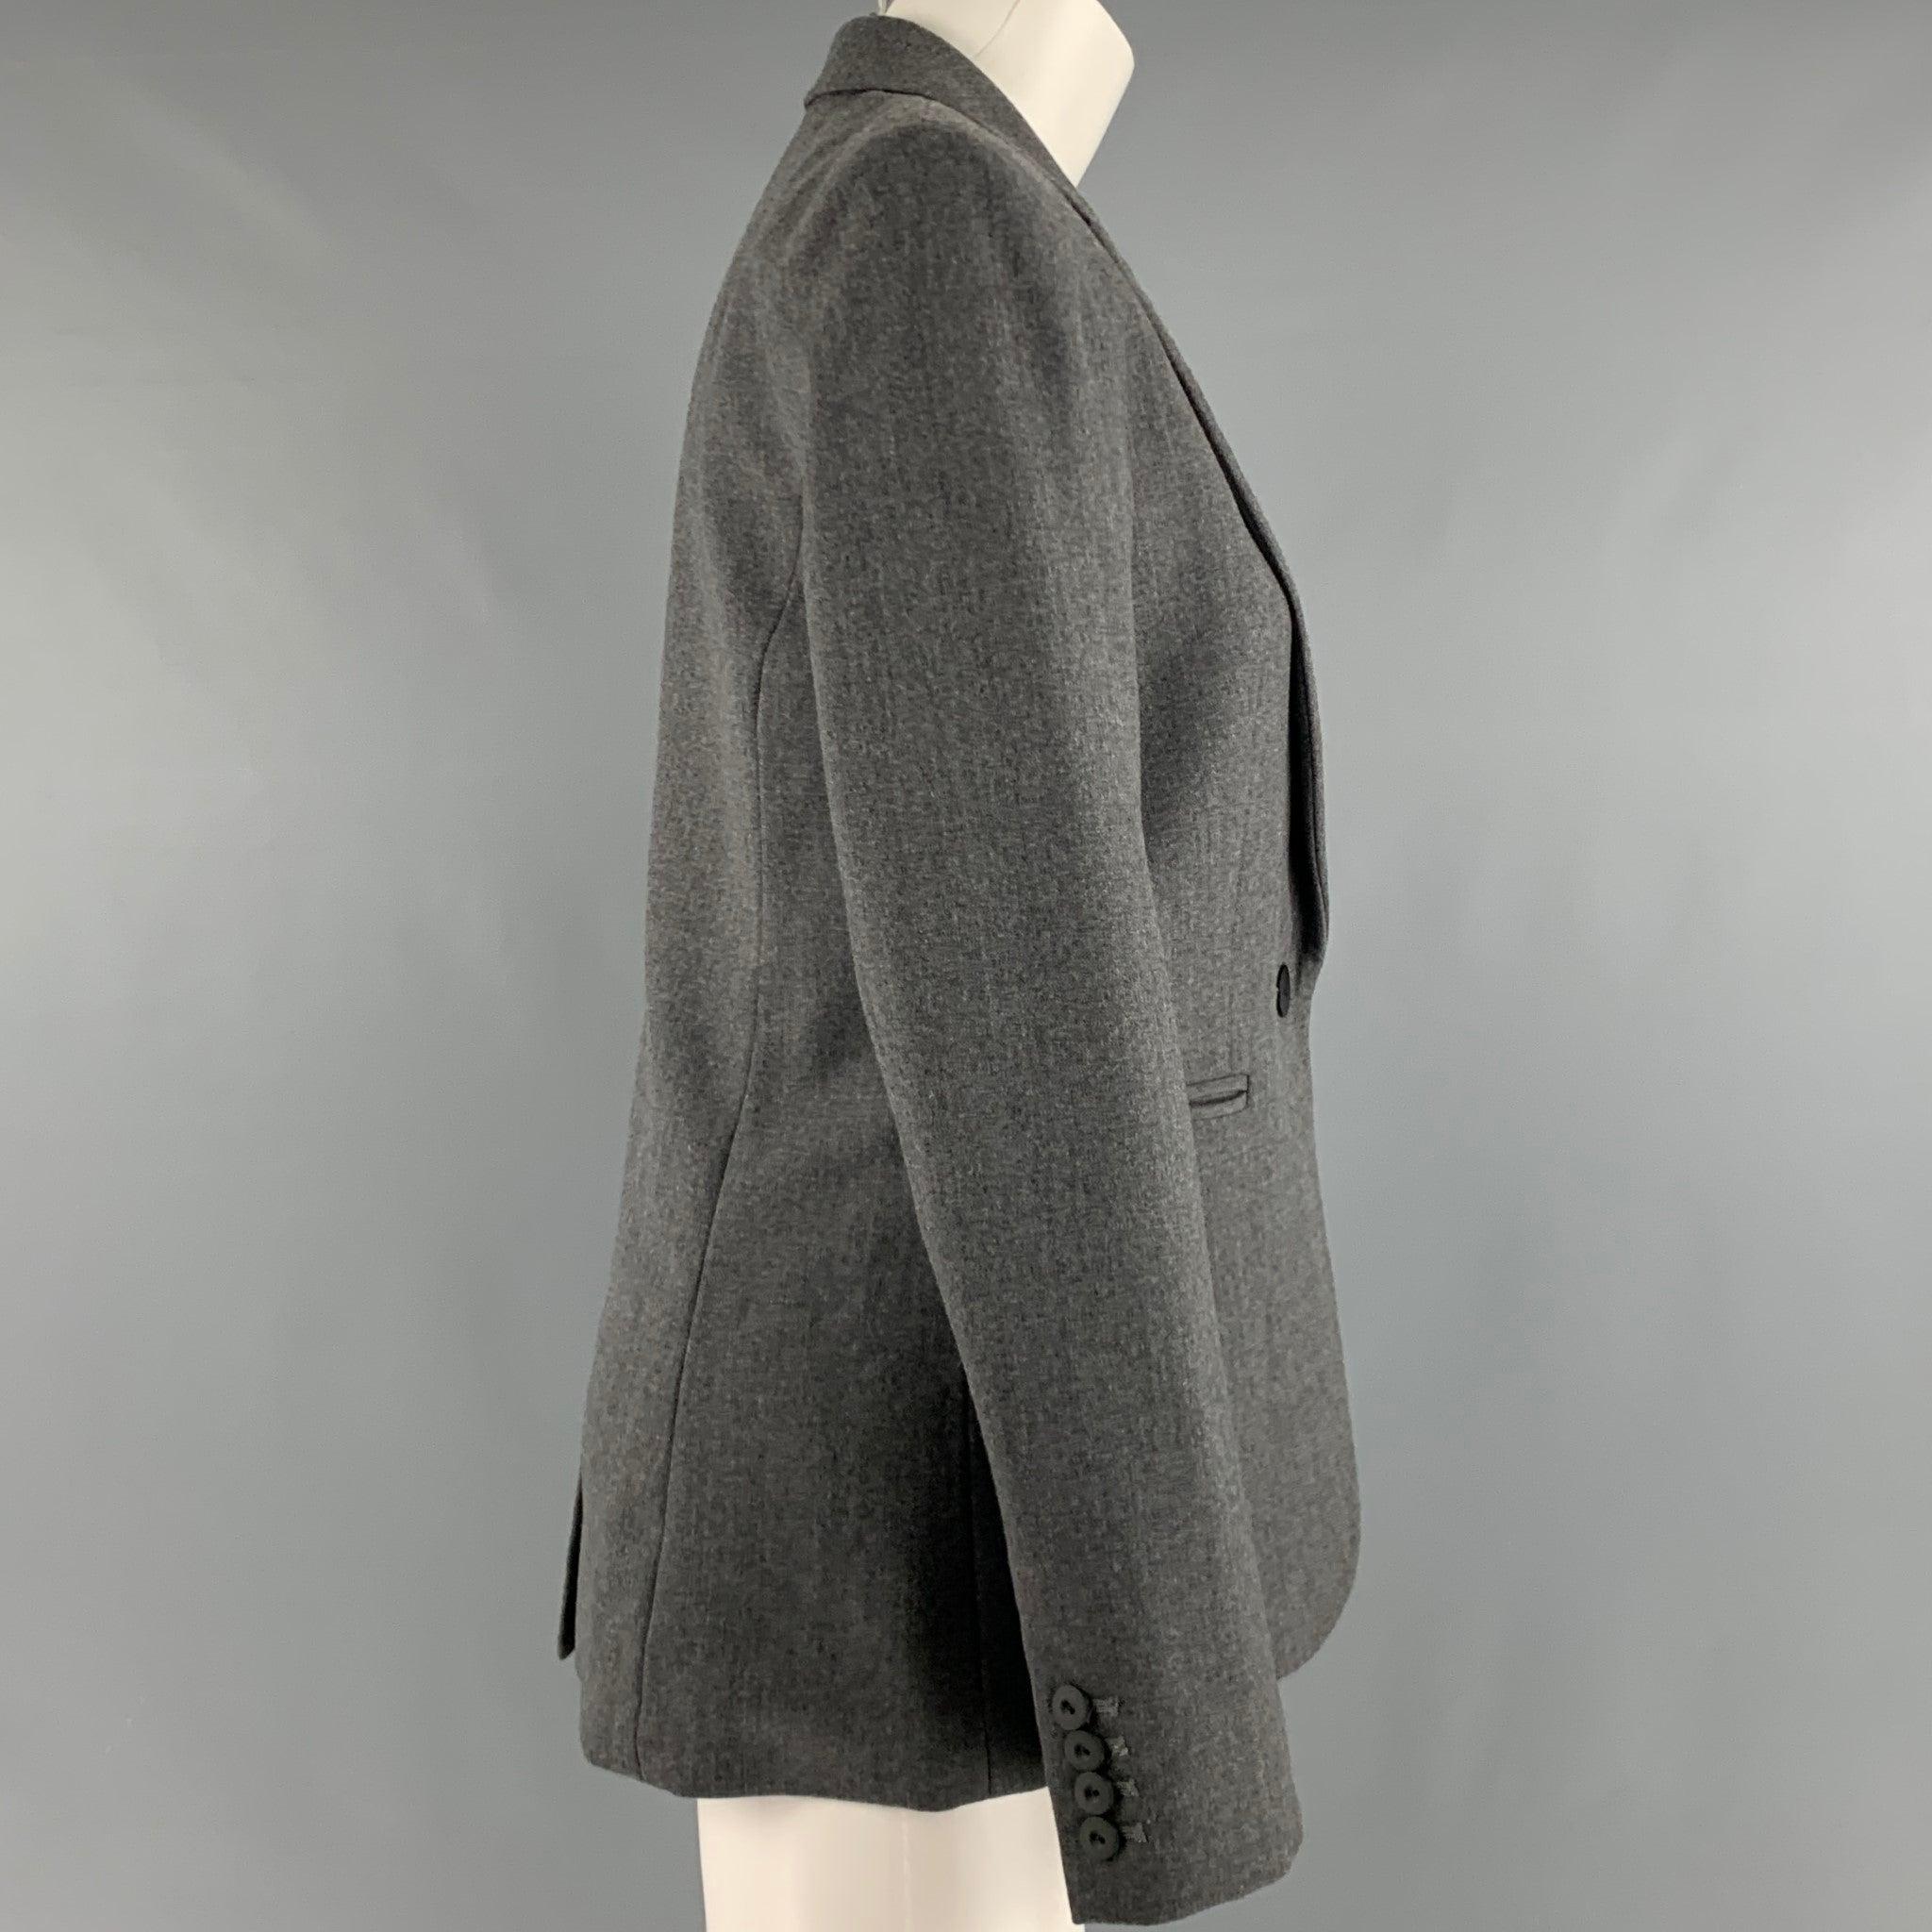 MARC by MARC JACOBS blazer
in a heather grey fabric with full liner featuring notch lapel, and single button closure. Made in USA.Excellent Pre-Owned Condition. 

Marked:   S 

Measurements: 
 
Shoulder: 16 inches Bust: 36 inches Sleeve: 24.5 inches